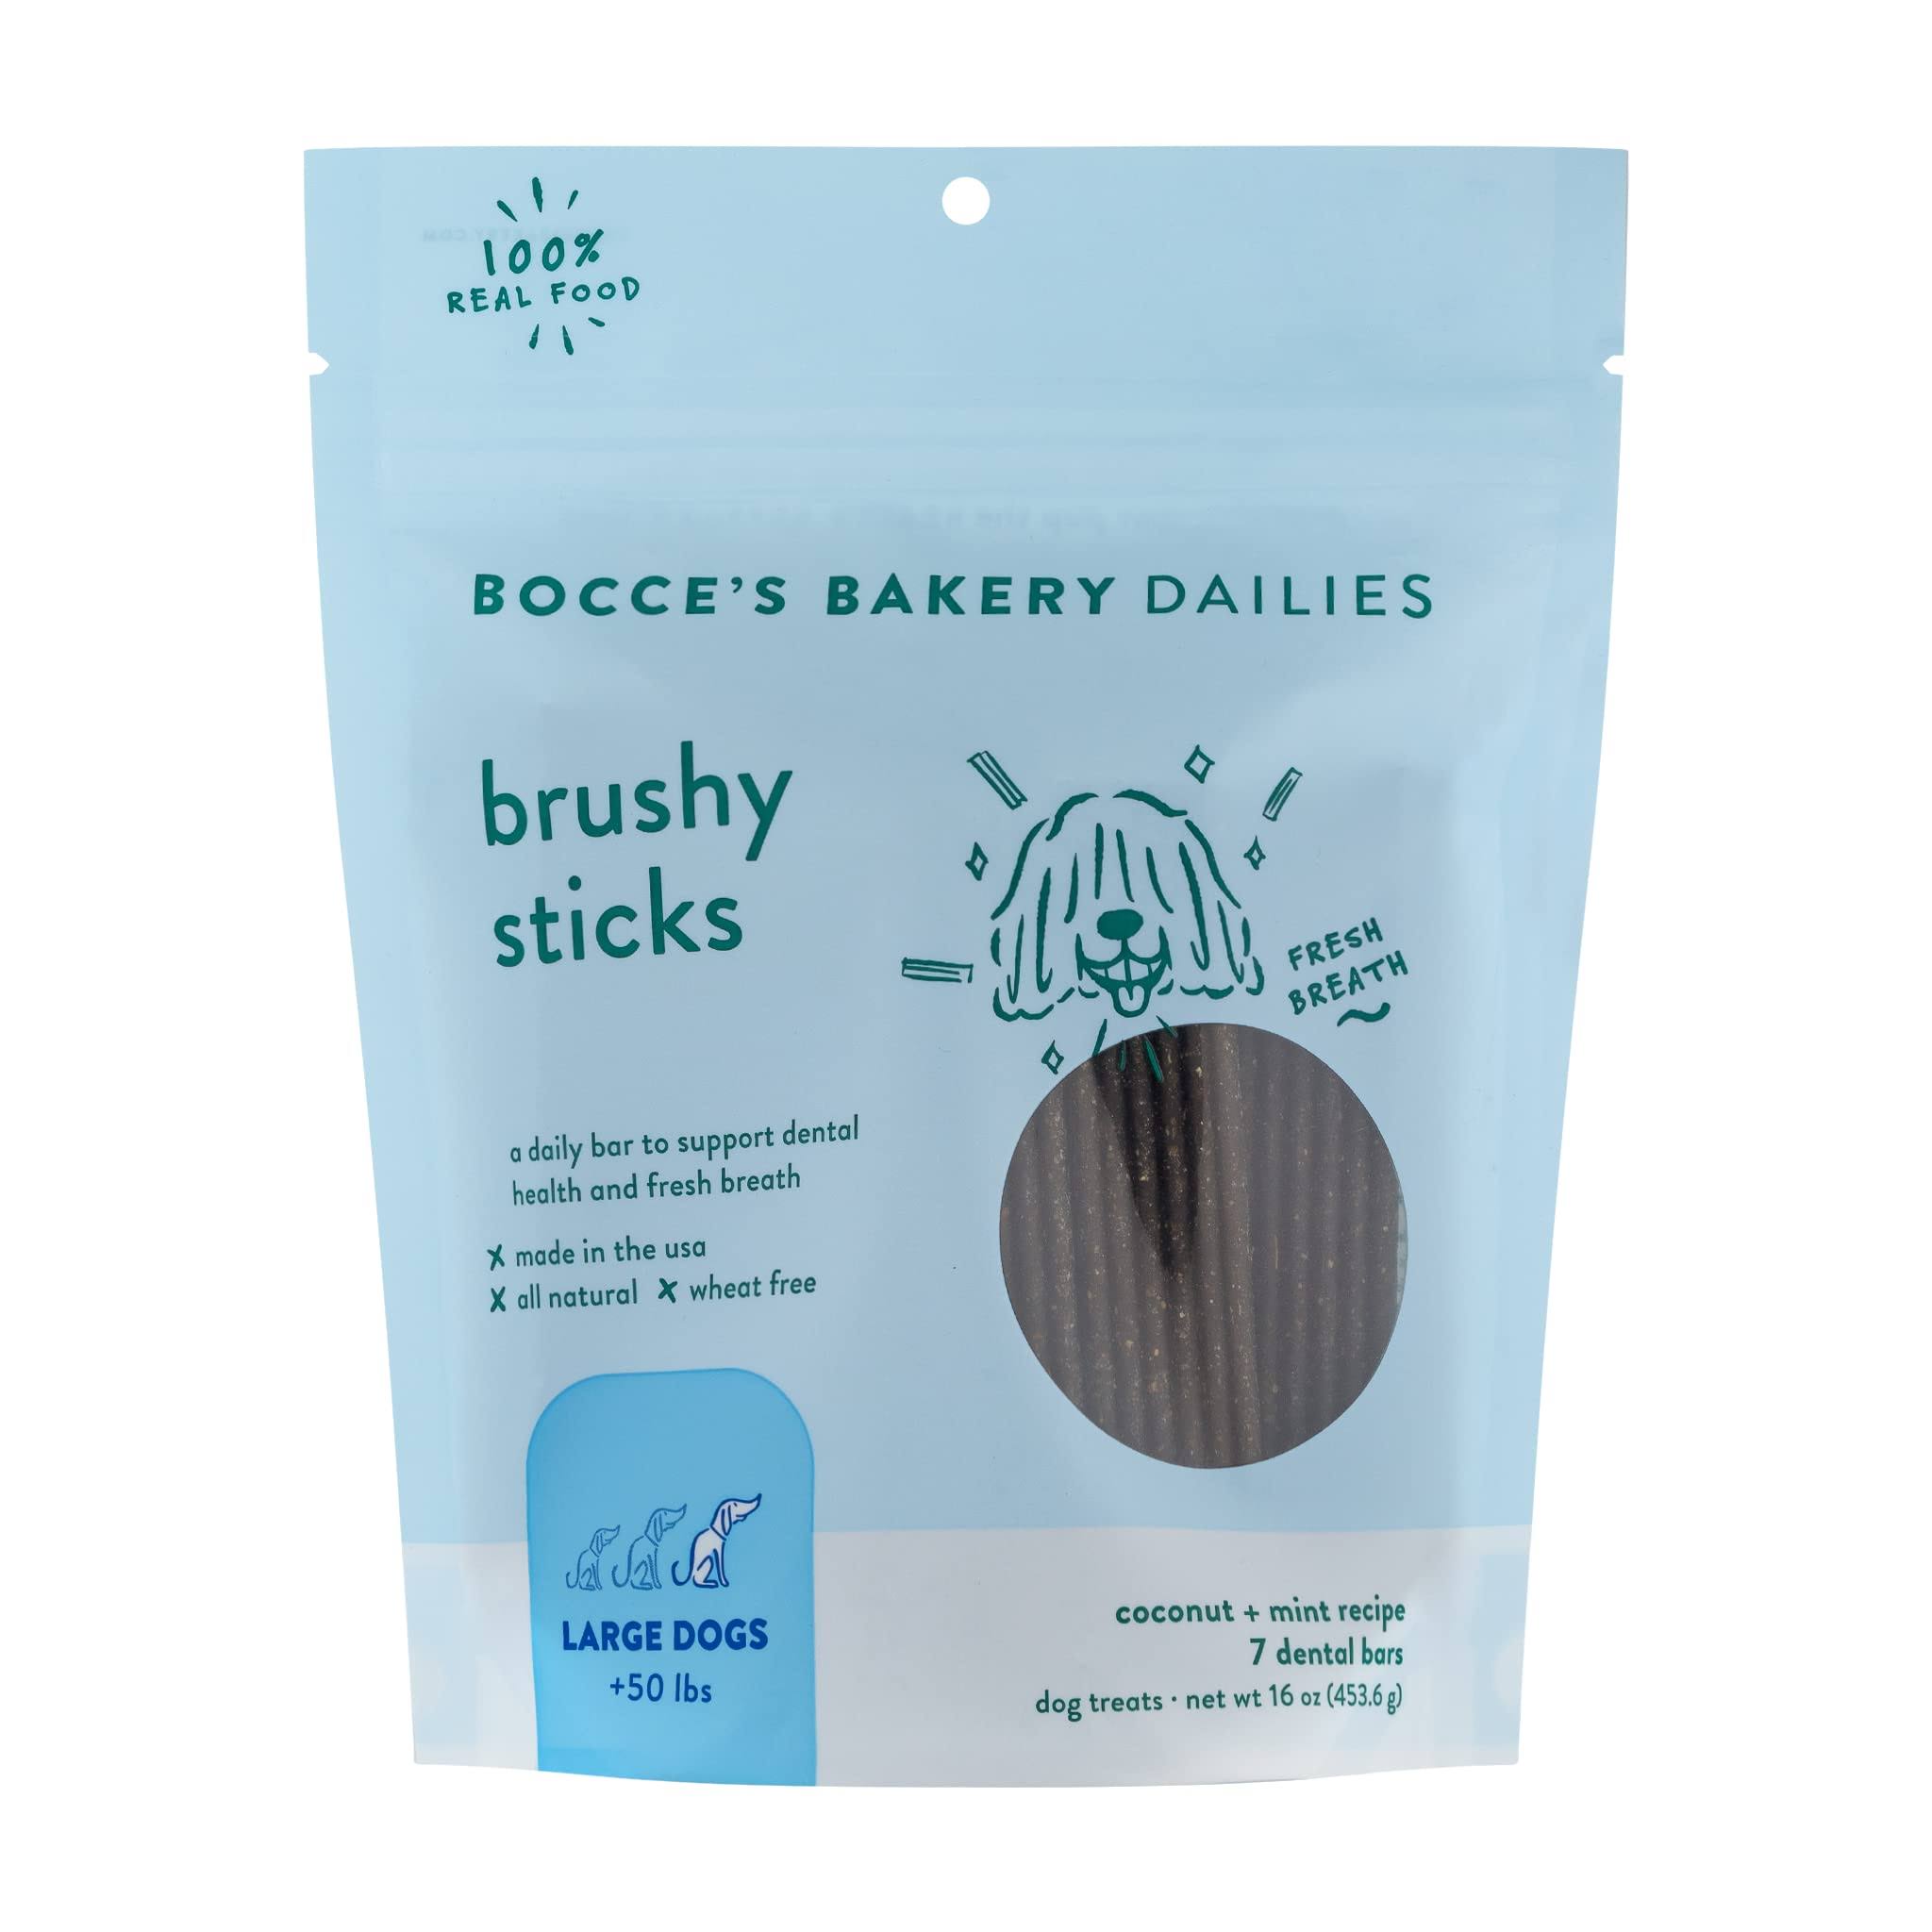 Bocce’s Bakery Dailies Brushy Sticks to Support Oral Health & Fresh Breath, Wheat-Free Dental Bars For Dogs, Made with Real Ingredients, Baked in The